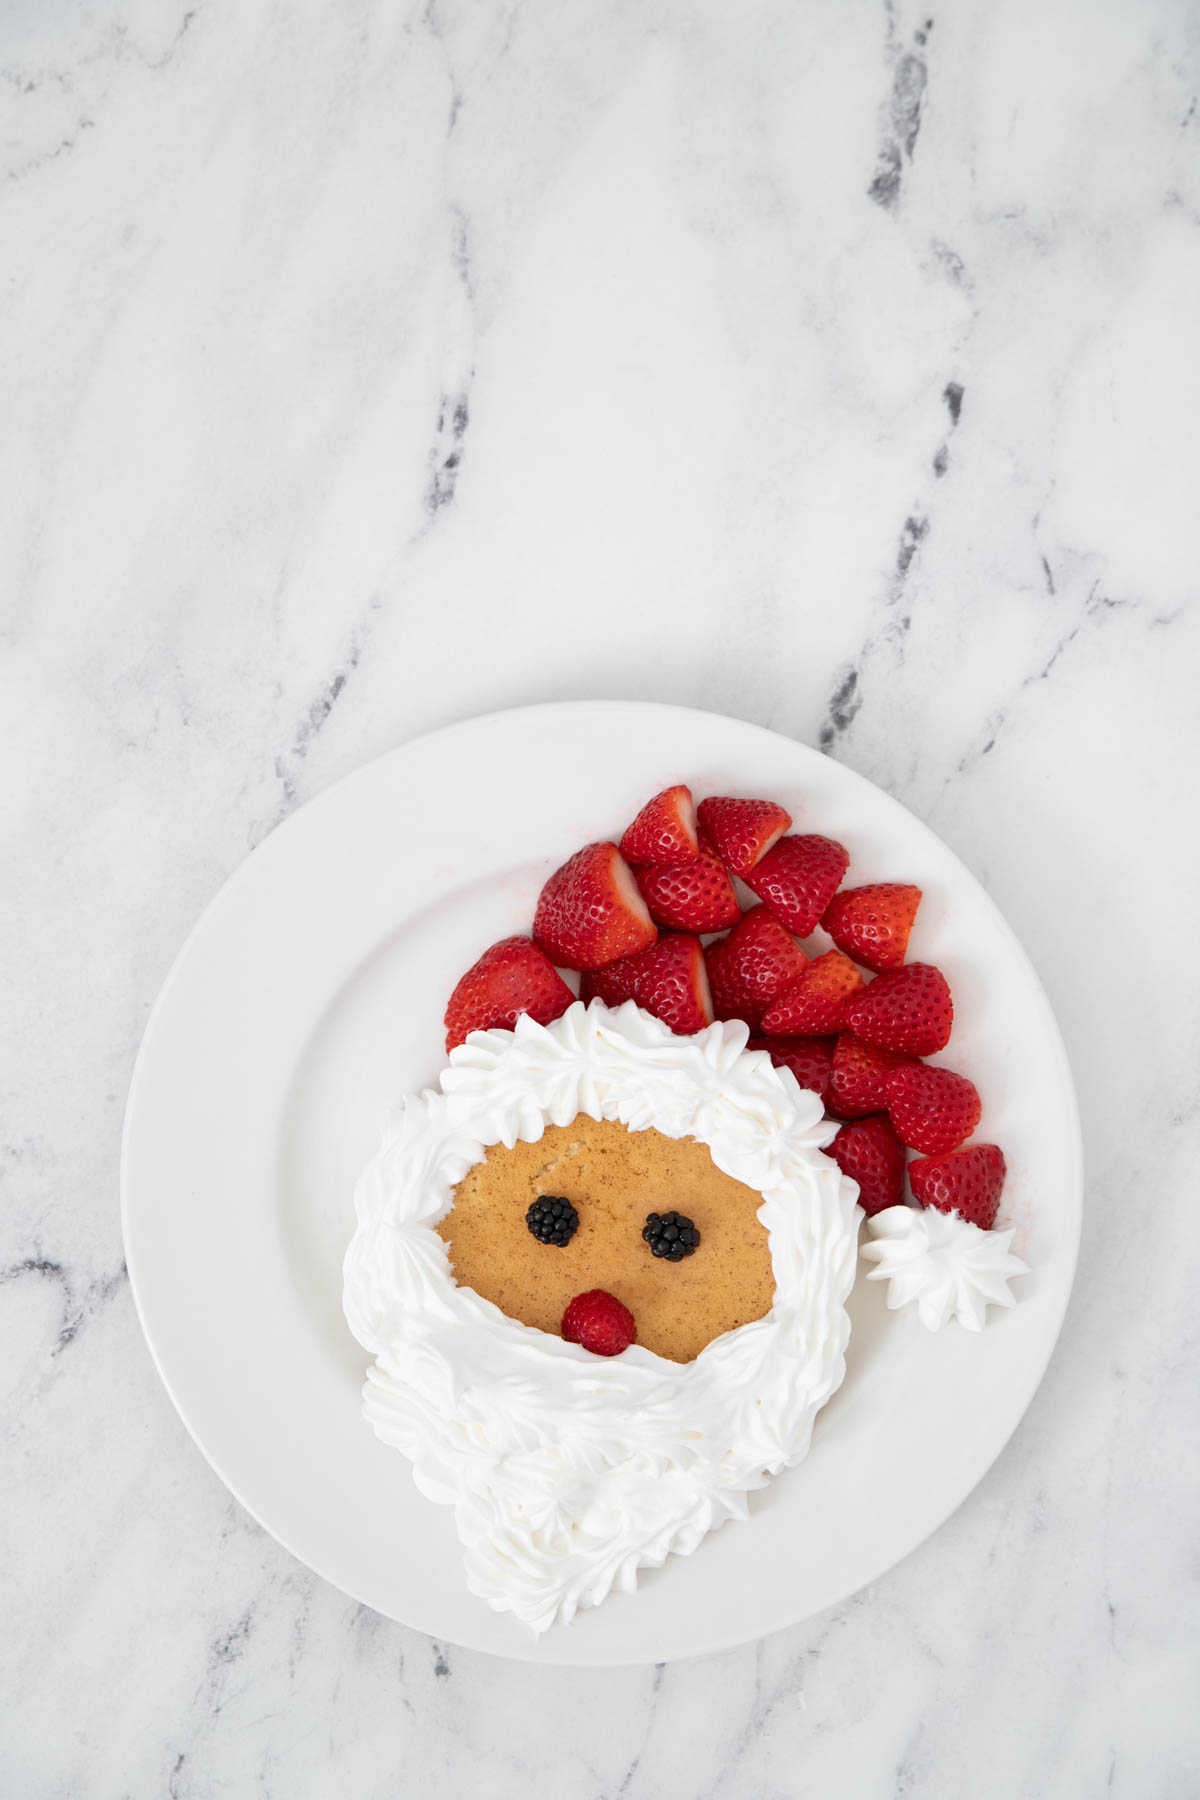 A plate with a santa claus and strawberries on it.